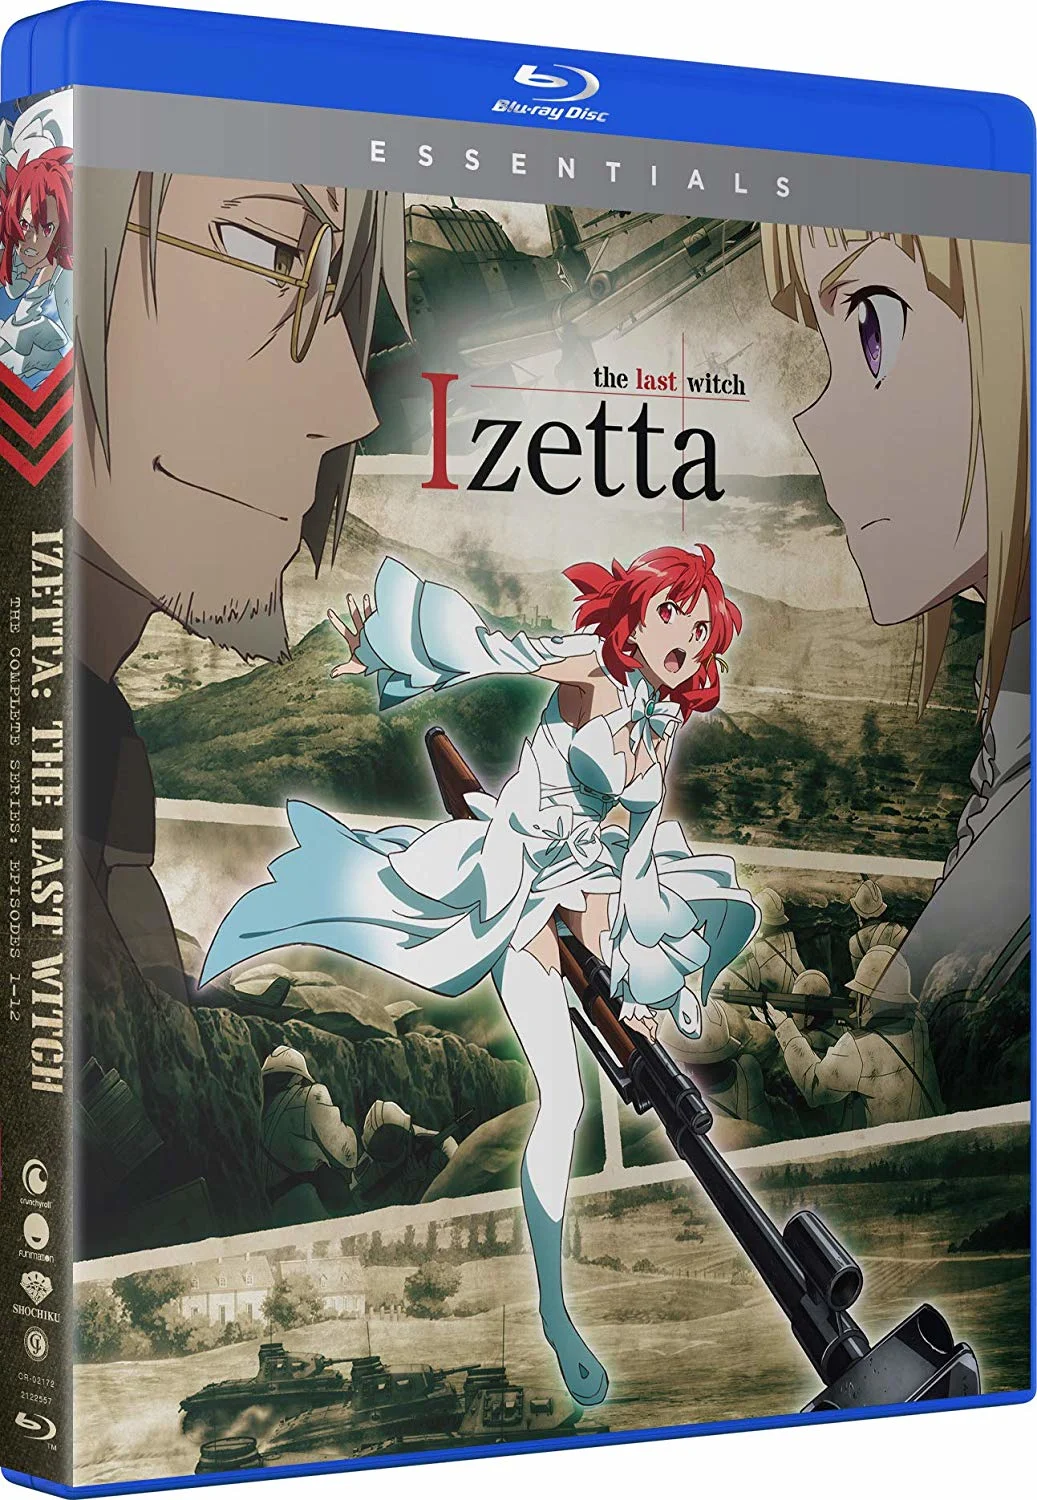 Izetta: The Last Witch – The Complete Series – Essentials (Blu-ray)